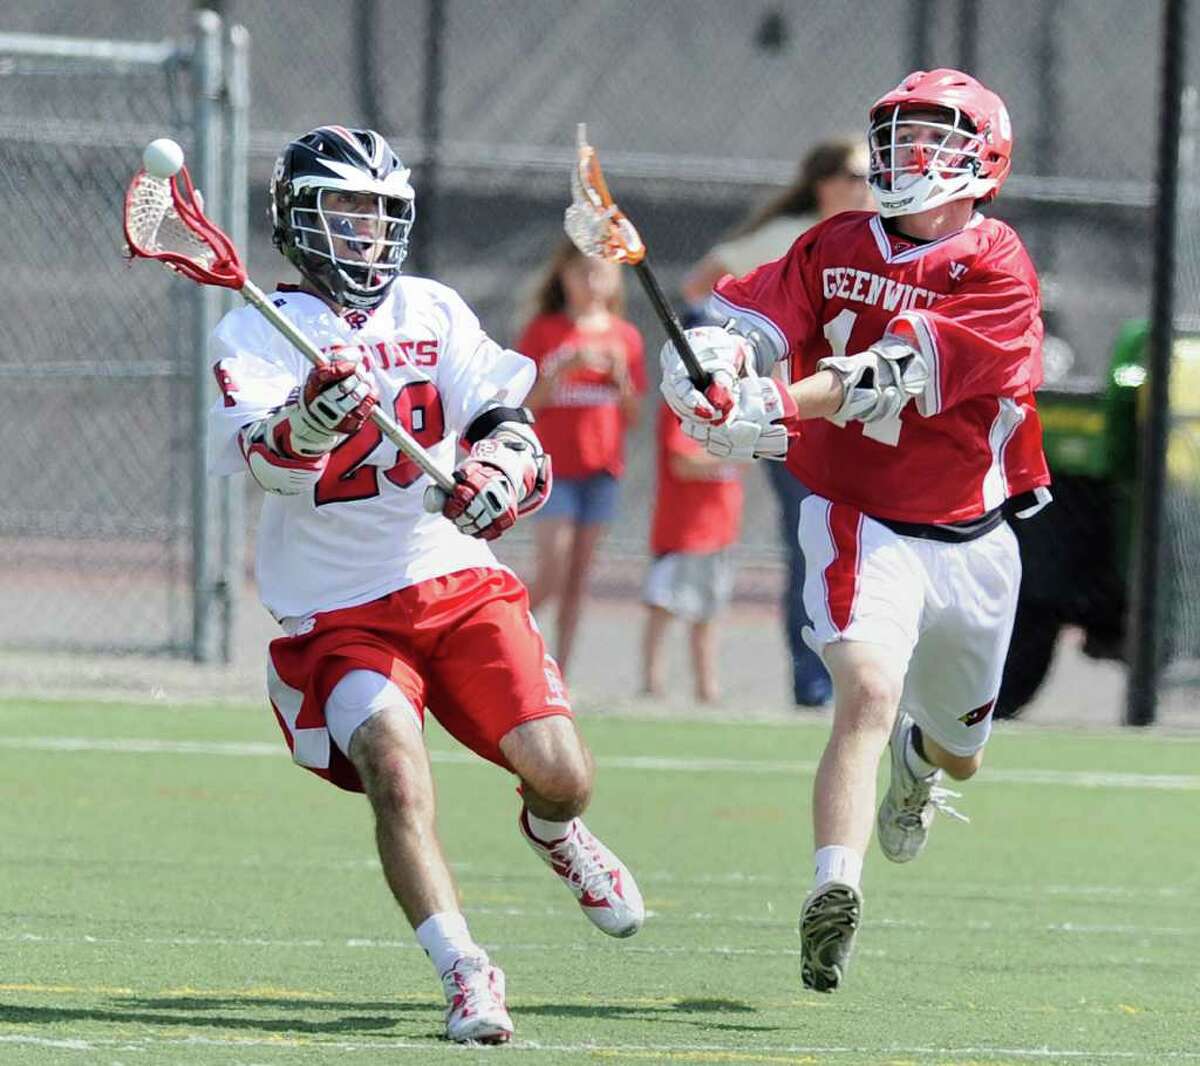 Joe McBride, left # 28 of Fairfield Prep, passes while being covered by Pete Cabrera, right # 11 of Greenwich High School, during the Class L boys lacrosse quarterfinal between Fairfield Prep and Greenwich High School at Fairfield University, Saturday afternoon, June 4, 2011.